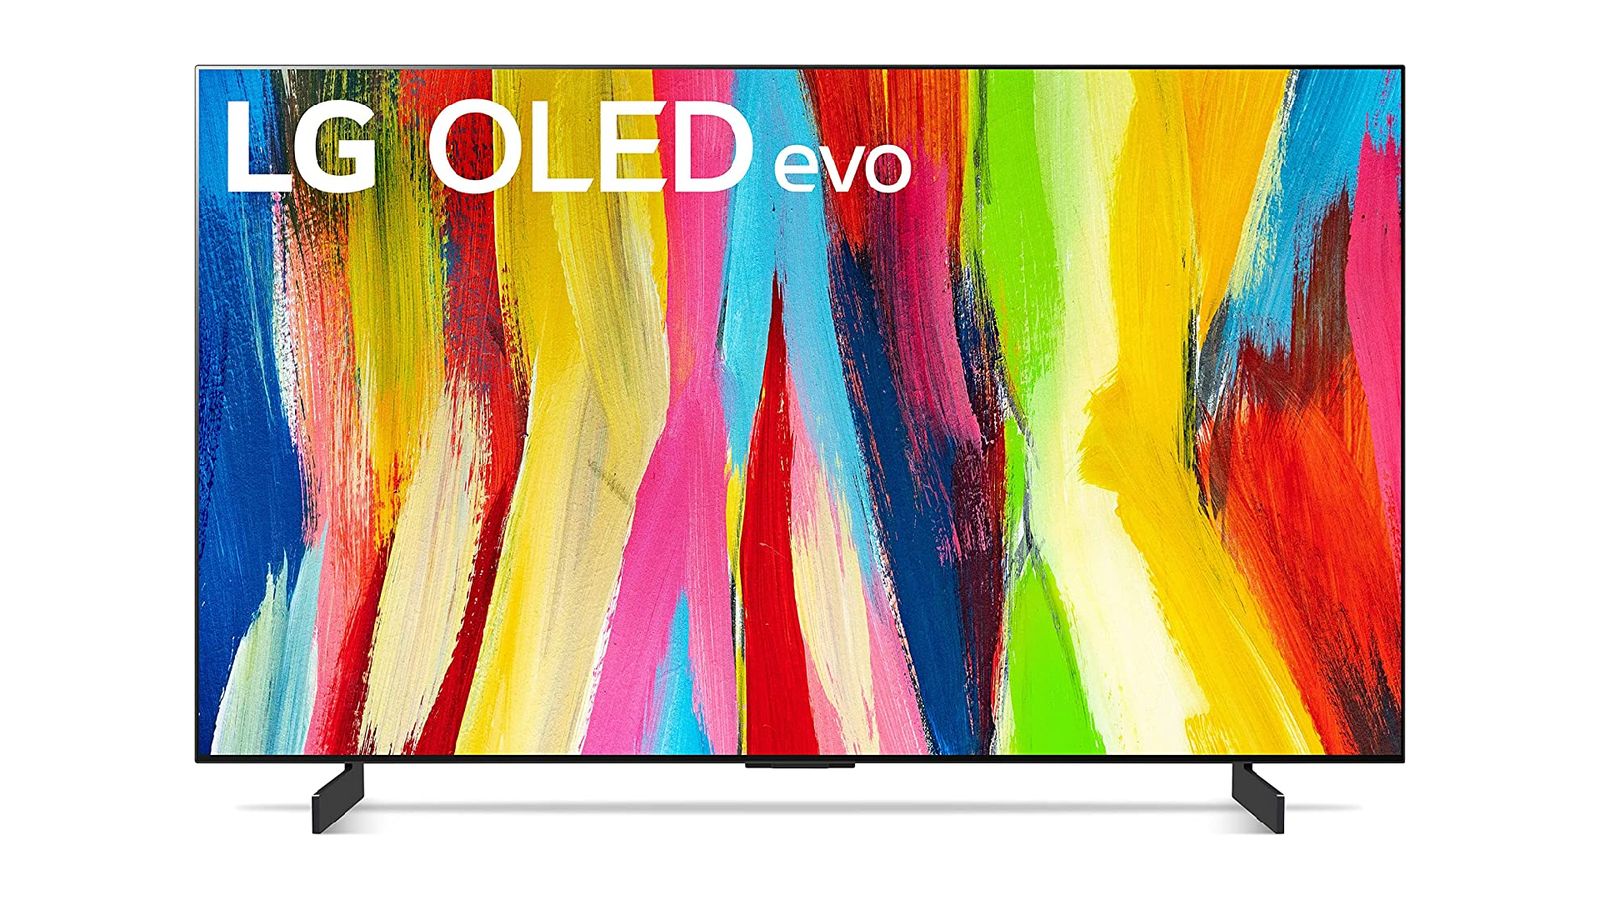 Best TV - LG OLED evo C2 product image of a flat TV with multi-coloured paint stripes on the display.